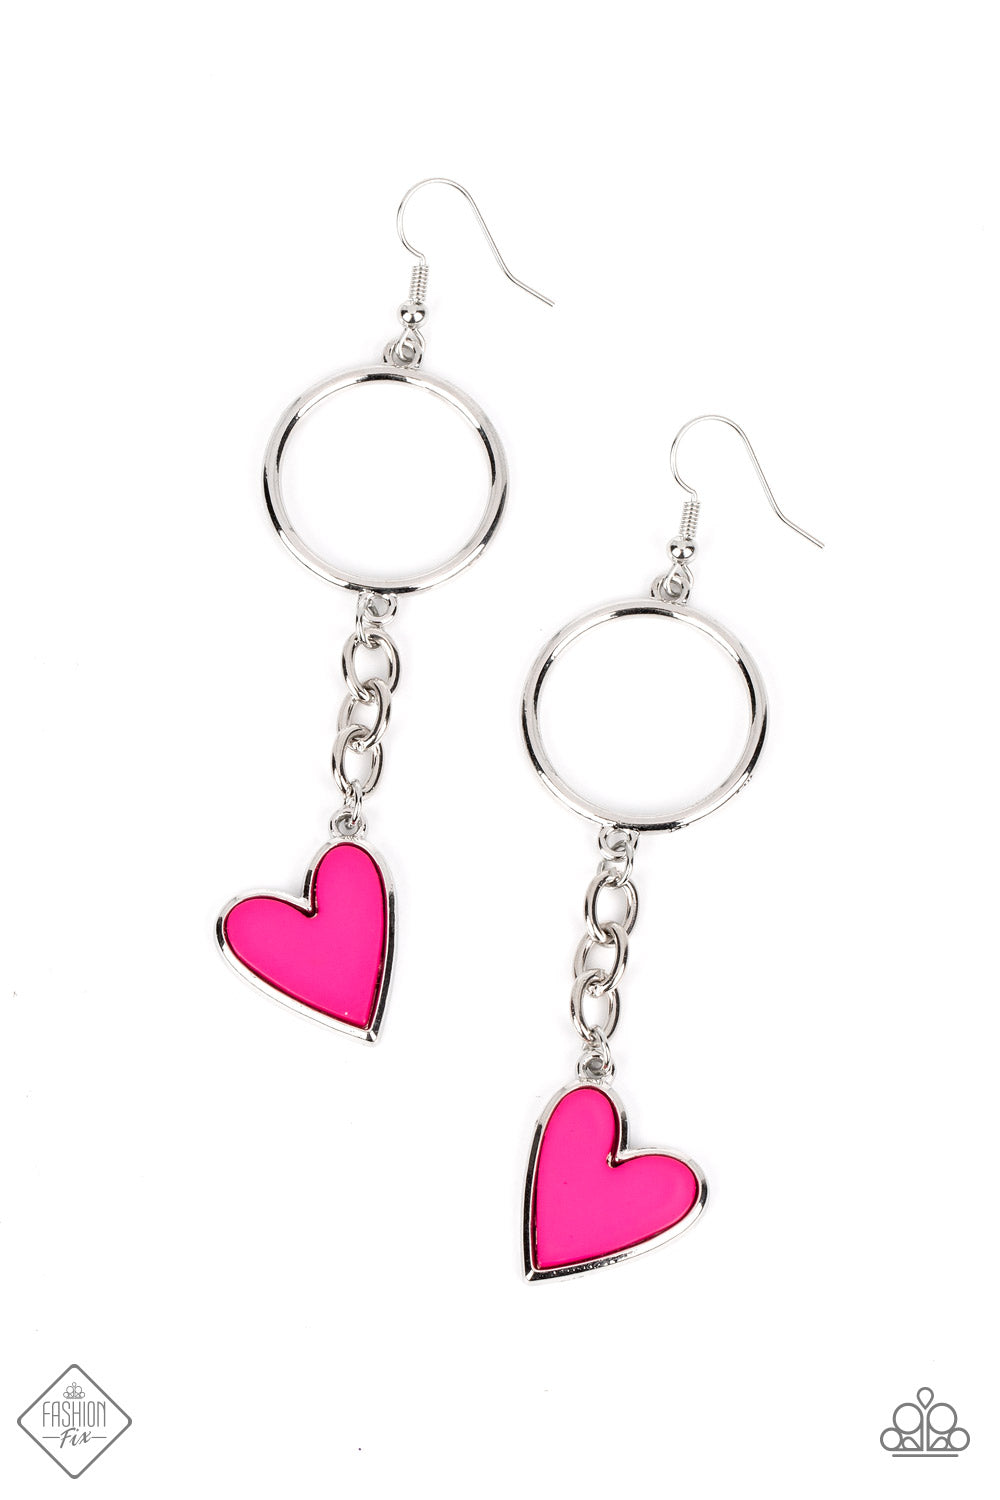 Paparazzi - Don't Miss a HEARTBEAT - Pink Earrings PREORDER